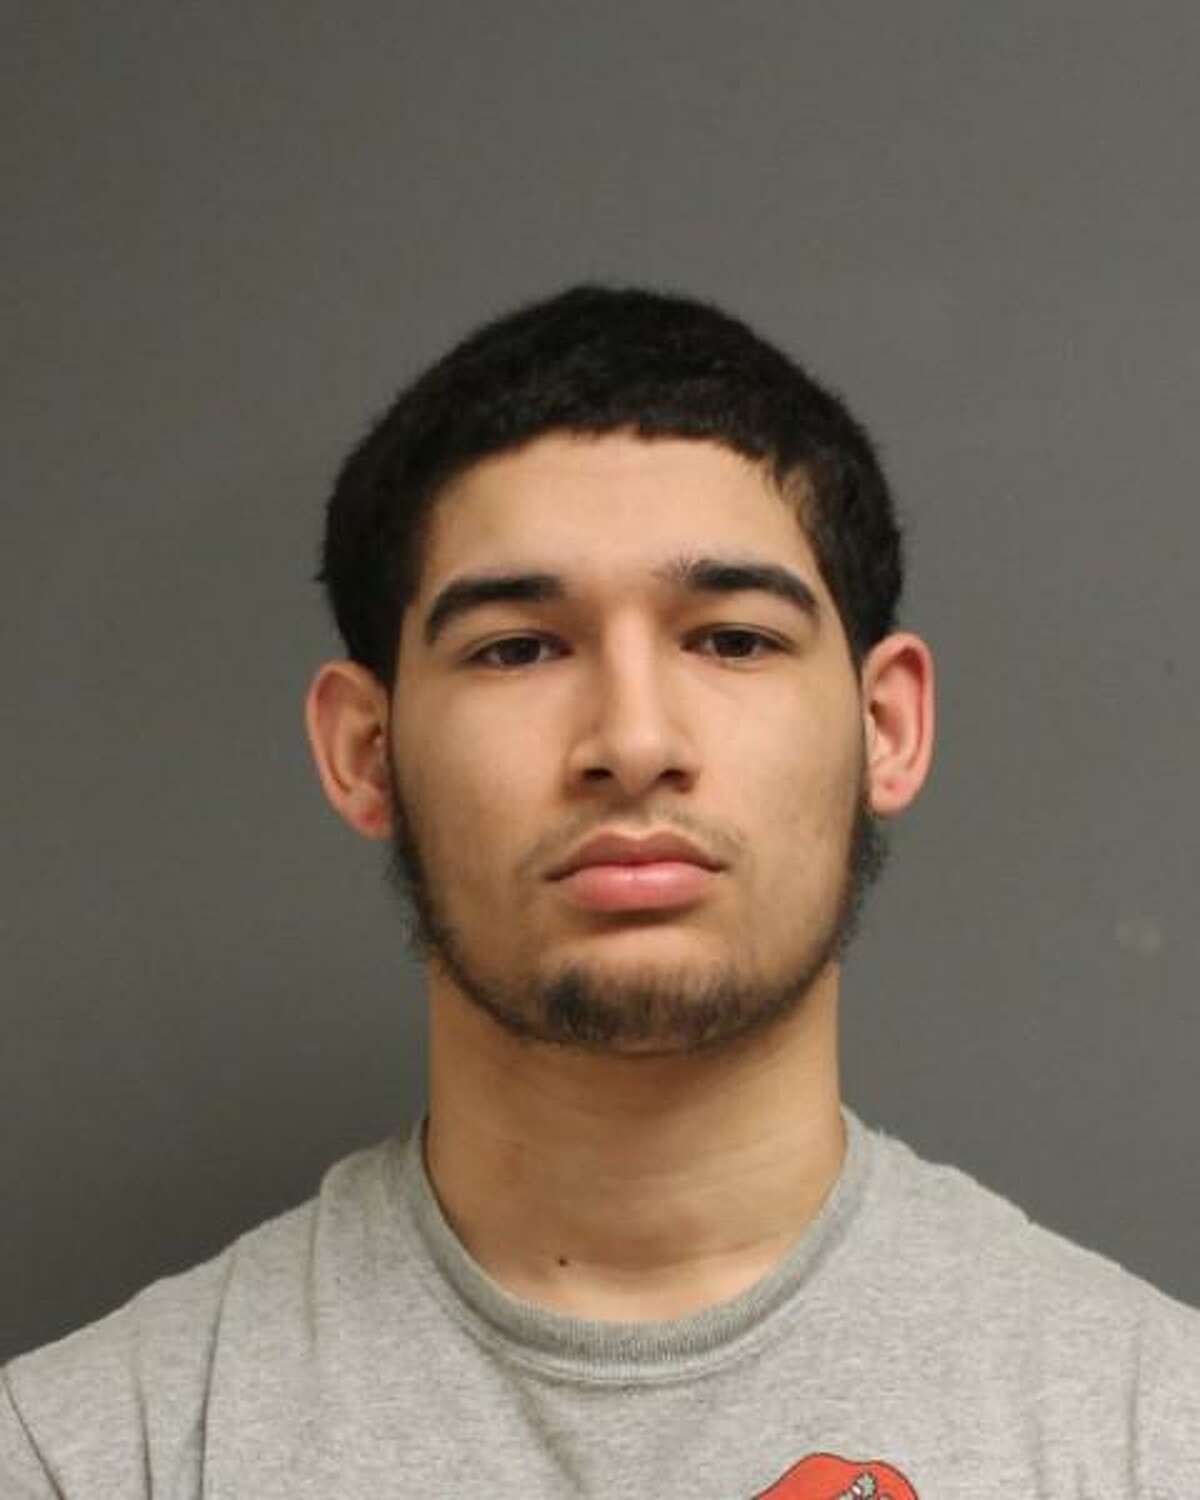 Eliezer Reyes, 19, of Shelton, Conn., was taken into custody on Wednesday, Feb. 10, 2021, and charged with second-degree robbery, second-degree assault and sixth-degree larceny.